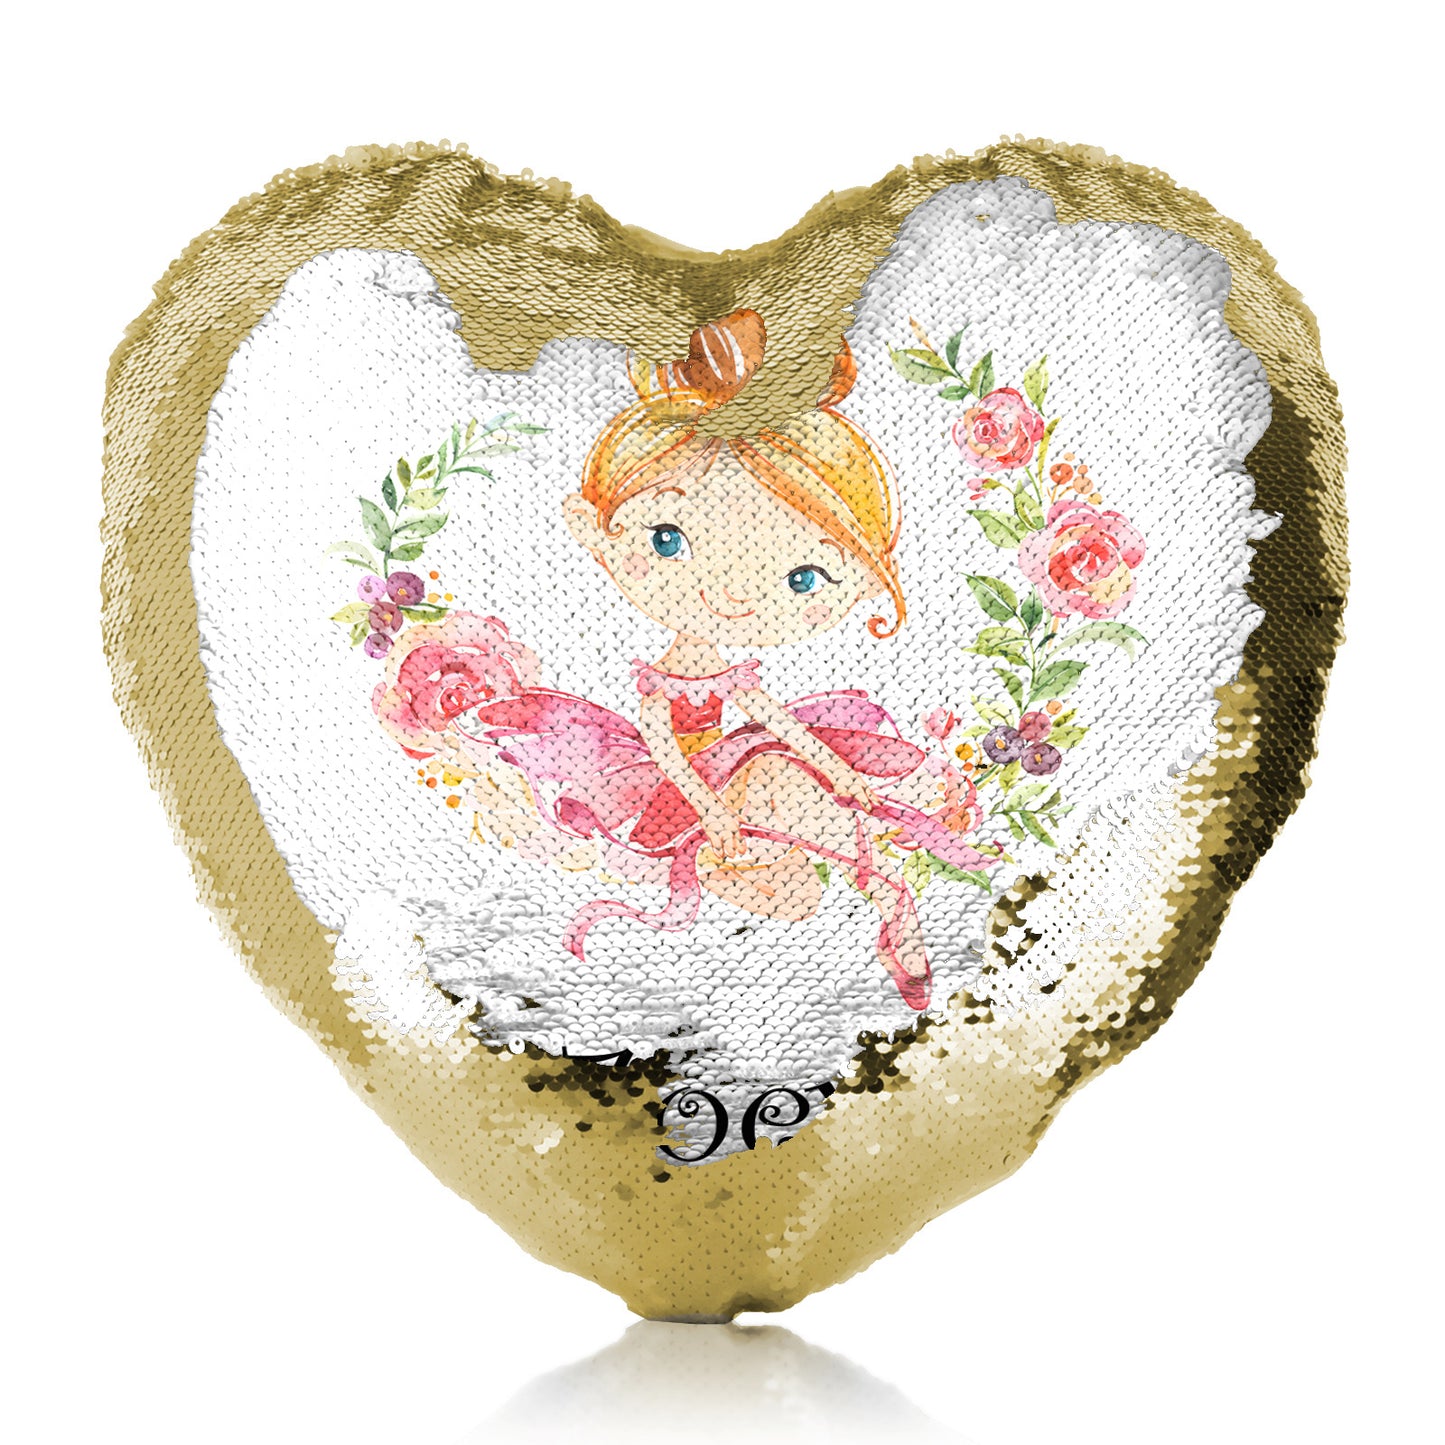 Personalised Sequin Heart Cushion with Cute Text and Flower Wreath Red Hair Ballerina